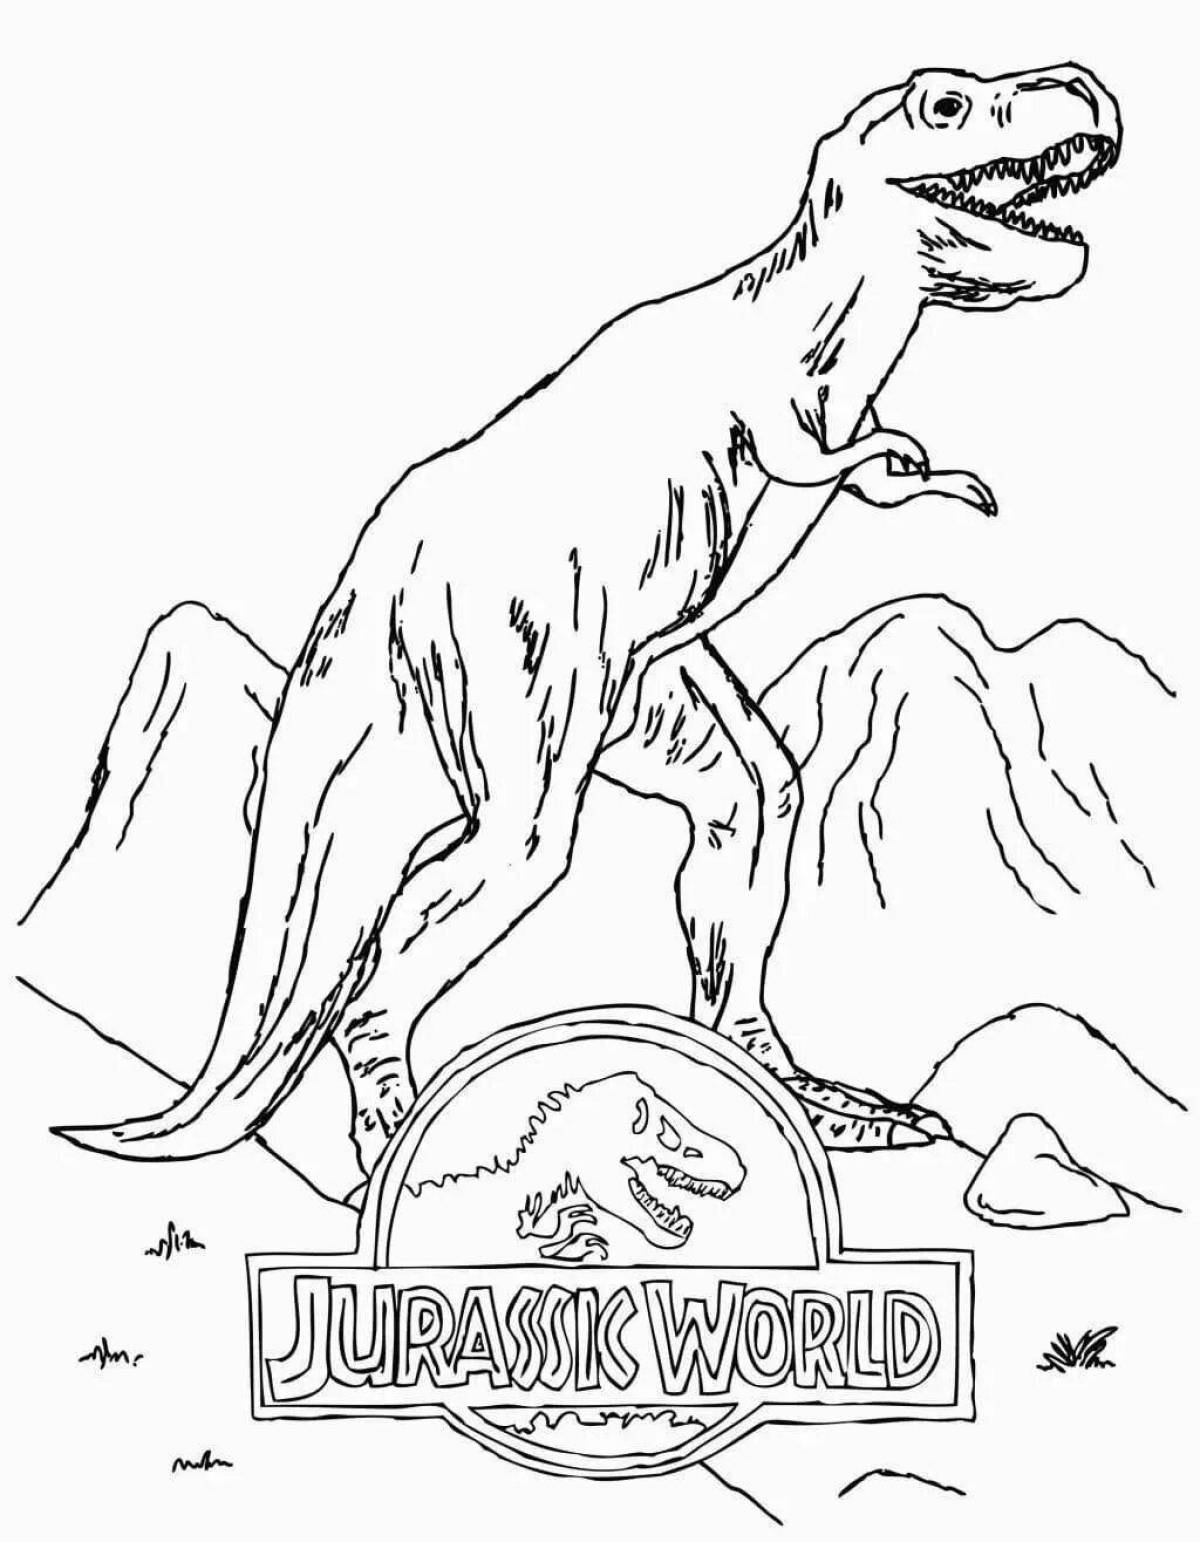 Creative jurassic park coloring book for kids